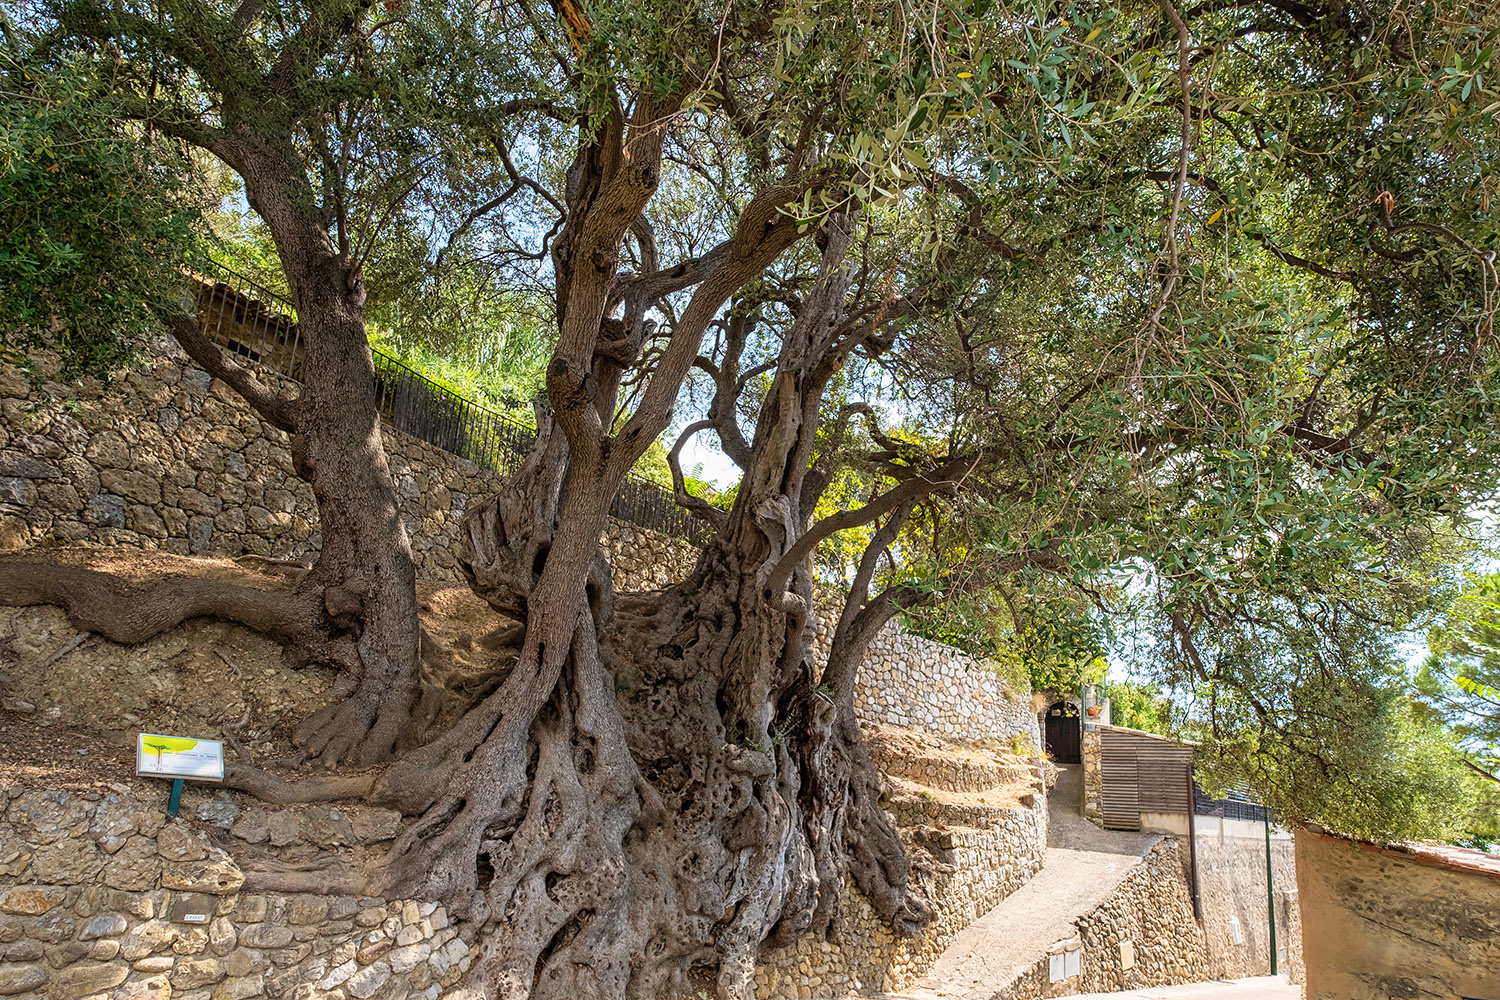 The age of this olive tree is estimated anywhere between 2,000 and 2,800 years—and it still produces olives!